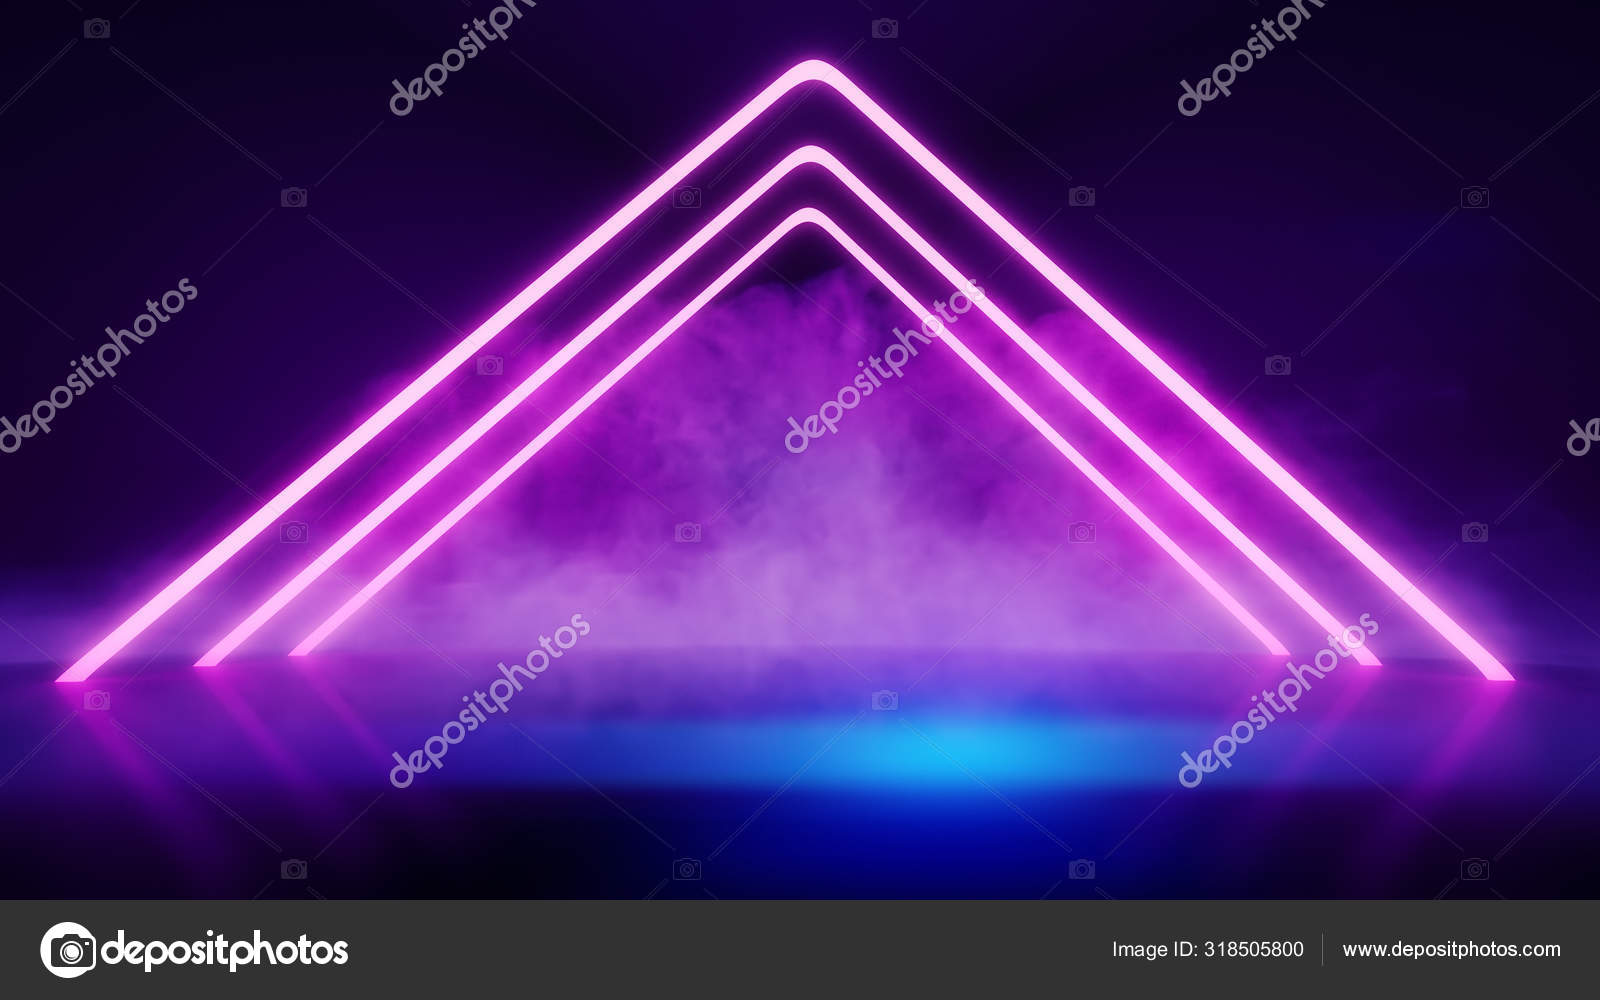 Neon background Stock Photos, Royalty Free Neon background Images |  Depositphotos